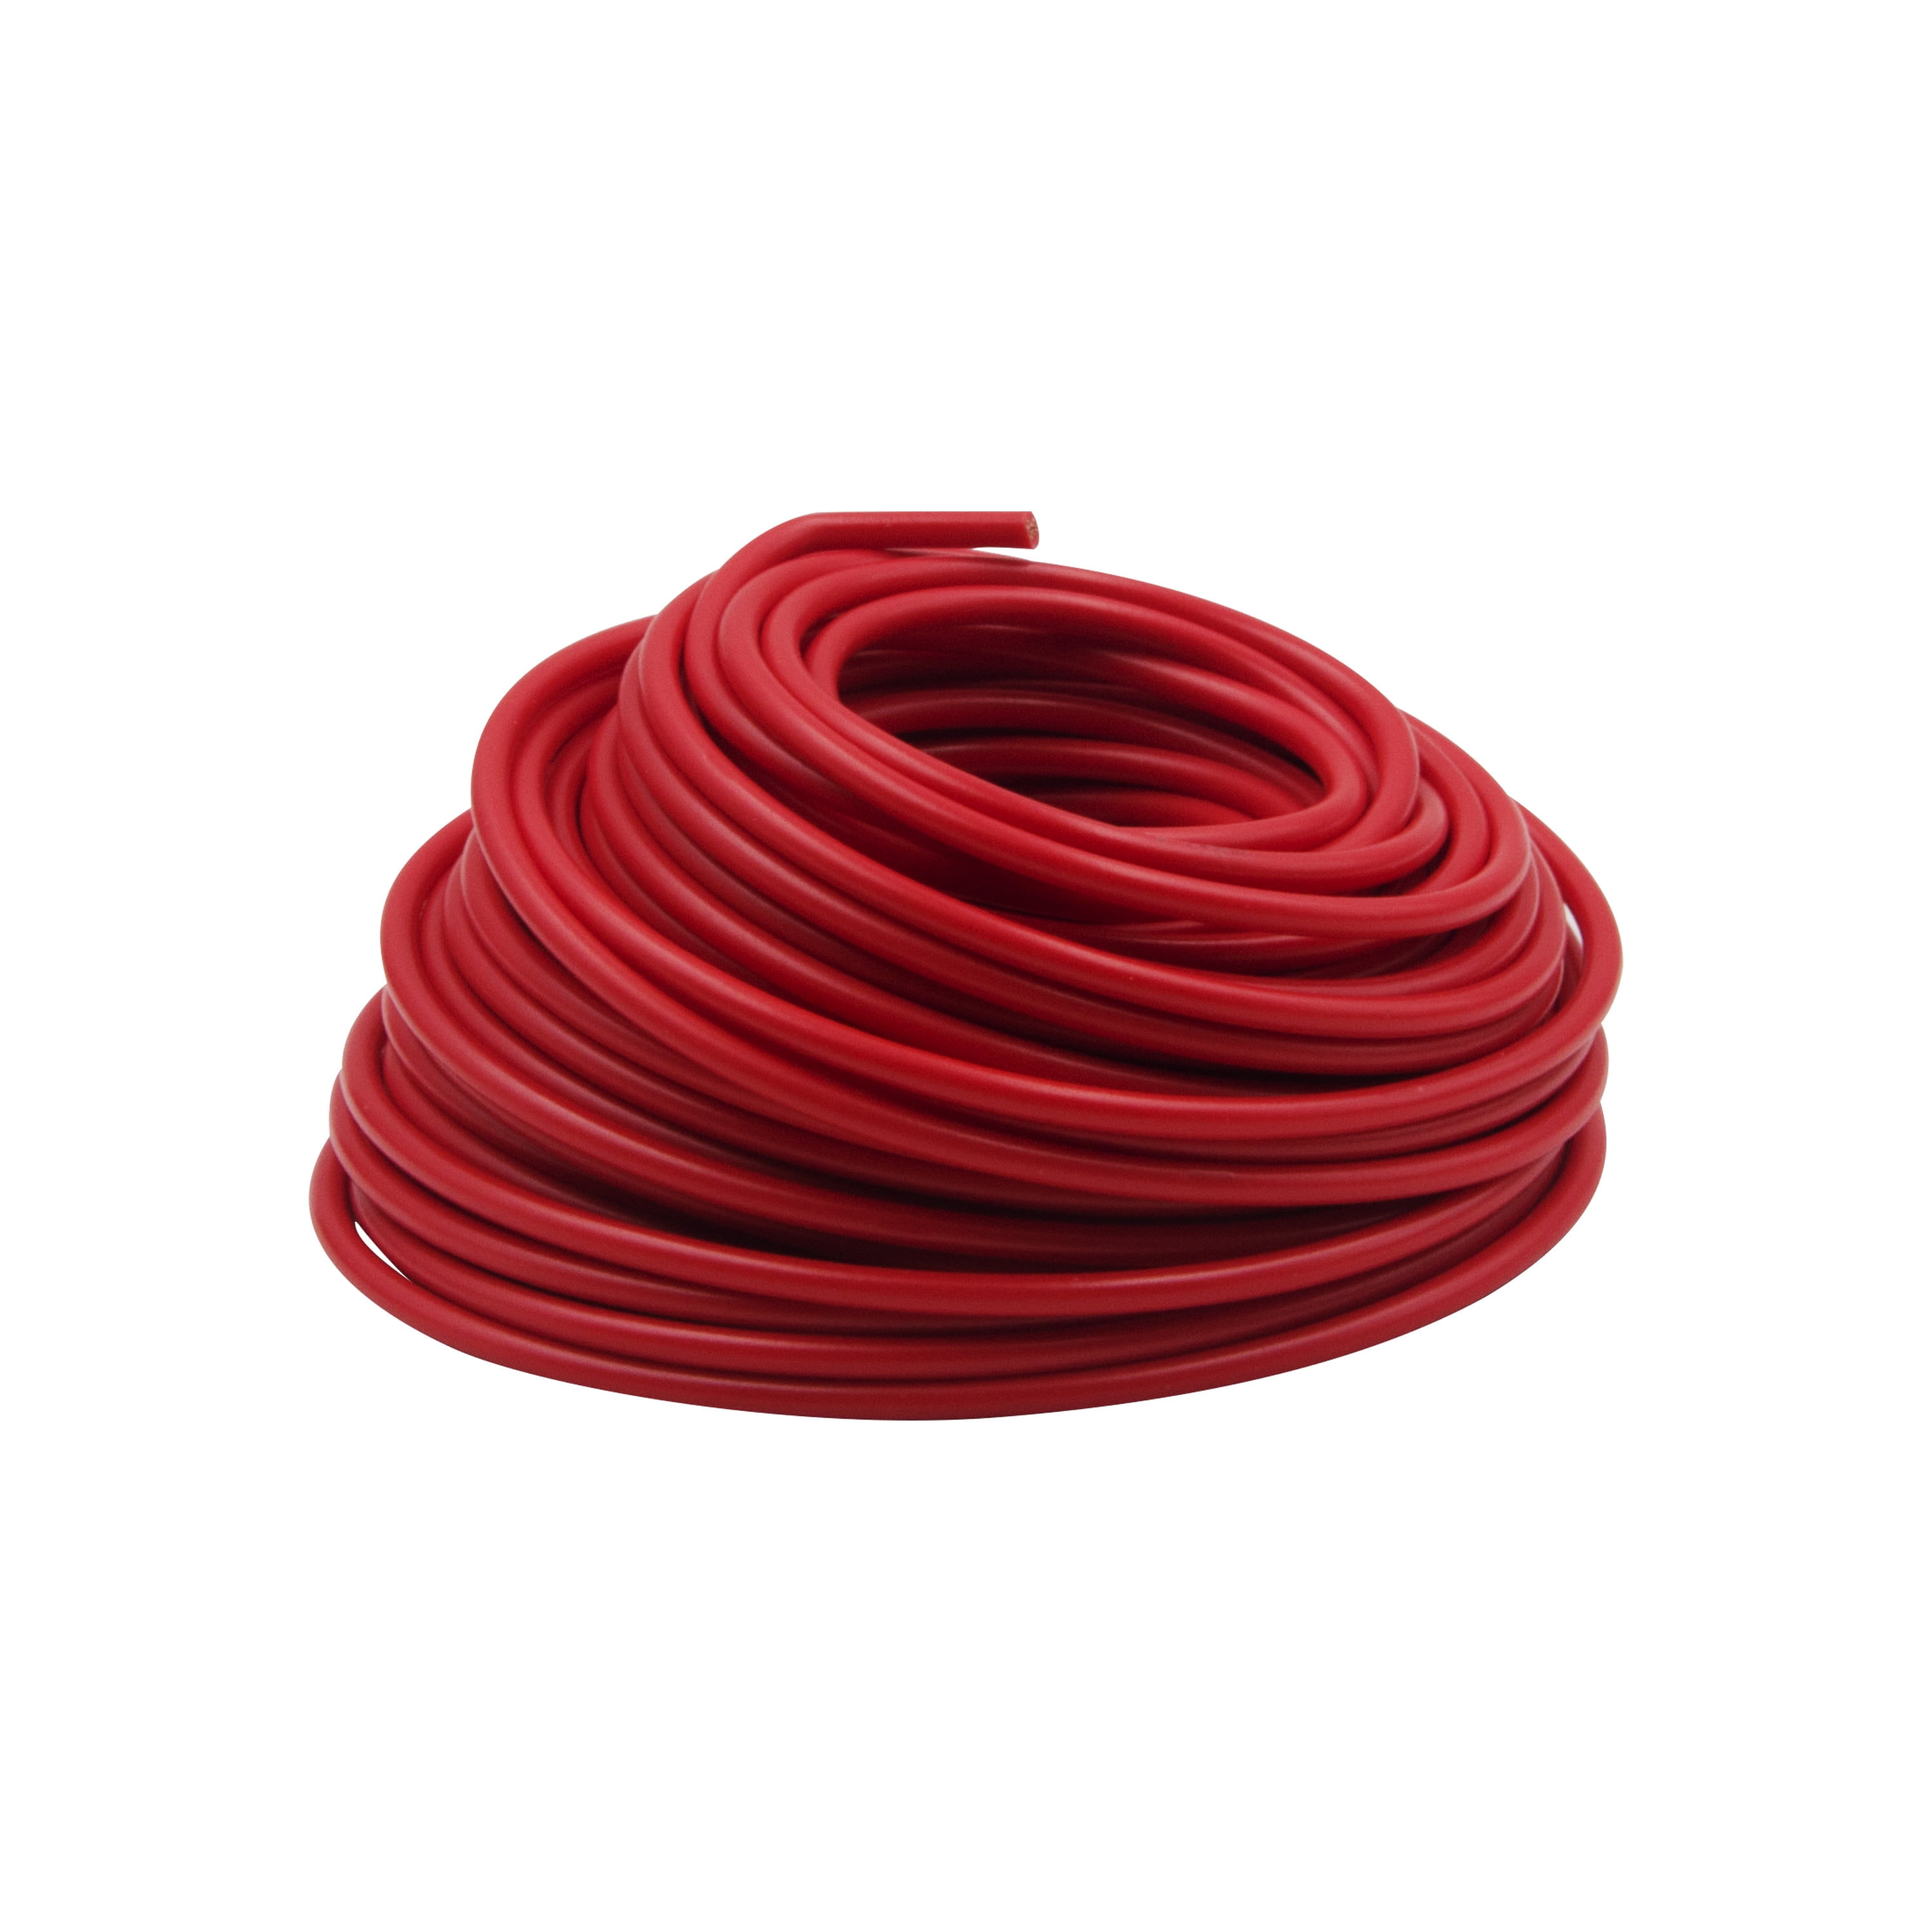 EverStart Universal 12-Gauge Auto Wire, Red, 12 feet, Light Swith to Fuse  Block or Relay for Car